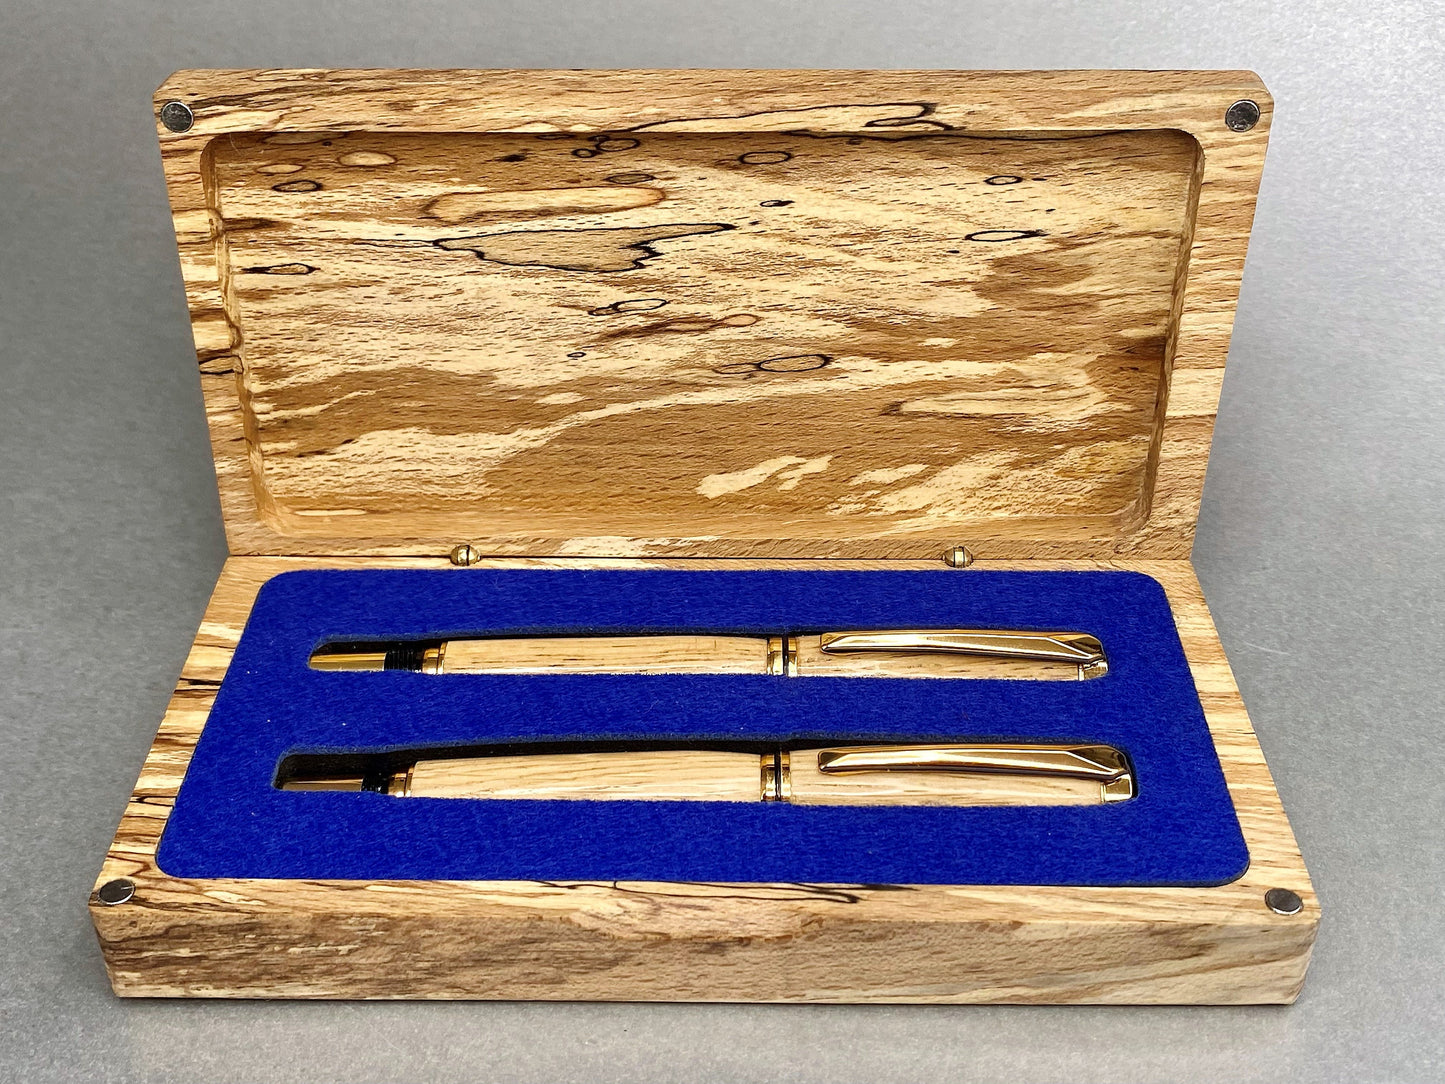 ~Spalted Beech wood hand crafted presentation box with its lid open showing two hand crafted and turned pens made from French Oak and has Gold Plated fittings